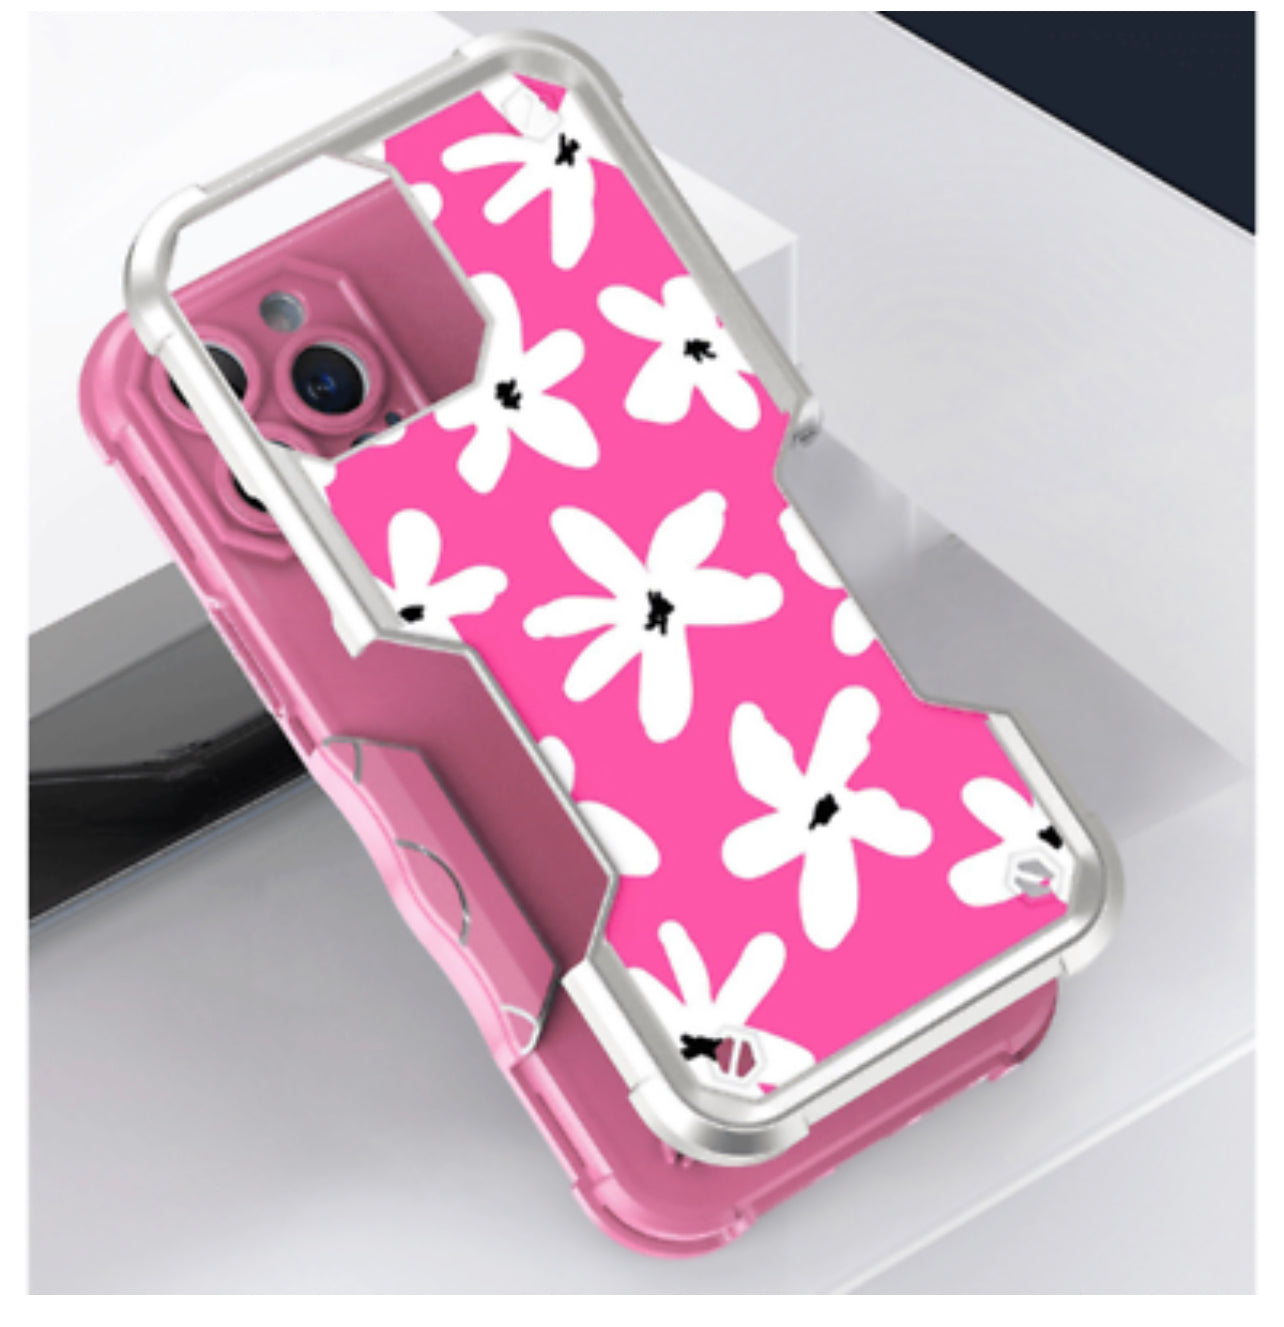 iPhone 14 6.1" Attractive Design Shockproof Hybrid Case Cover